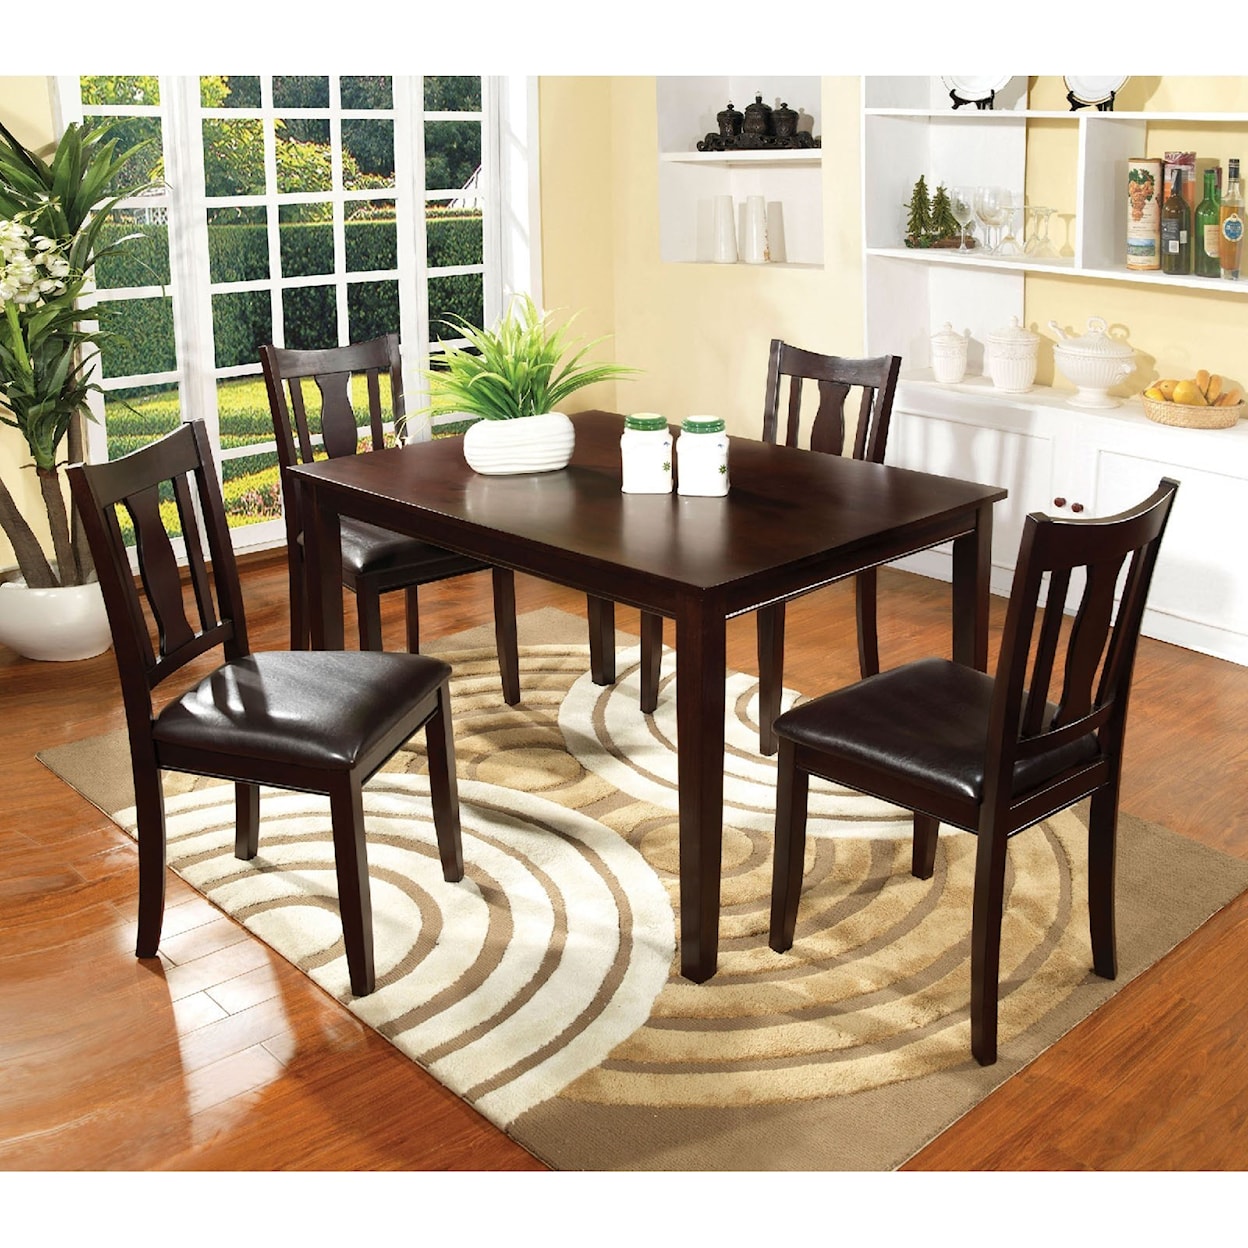 Furniture of America Northvale I 5 Pc. Dining Table Set